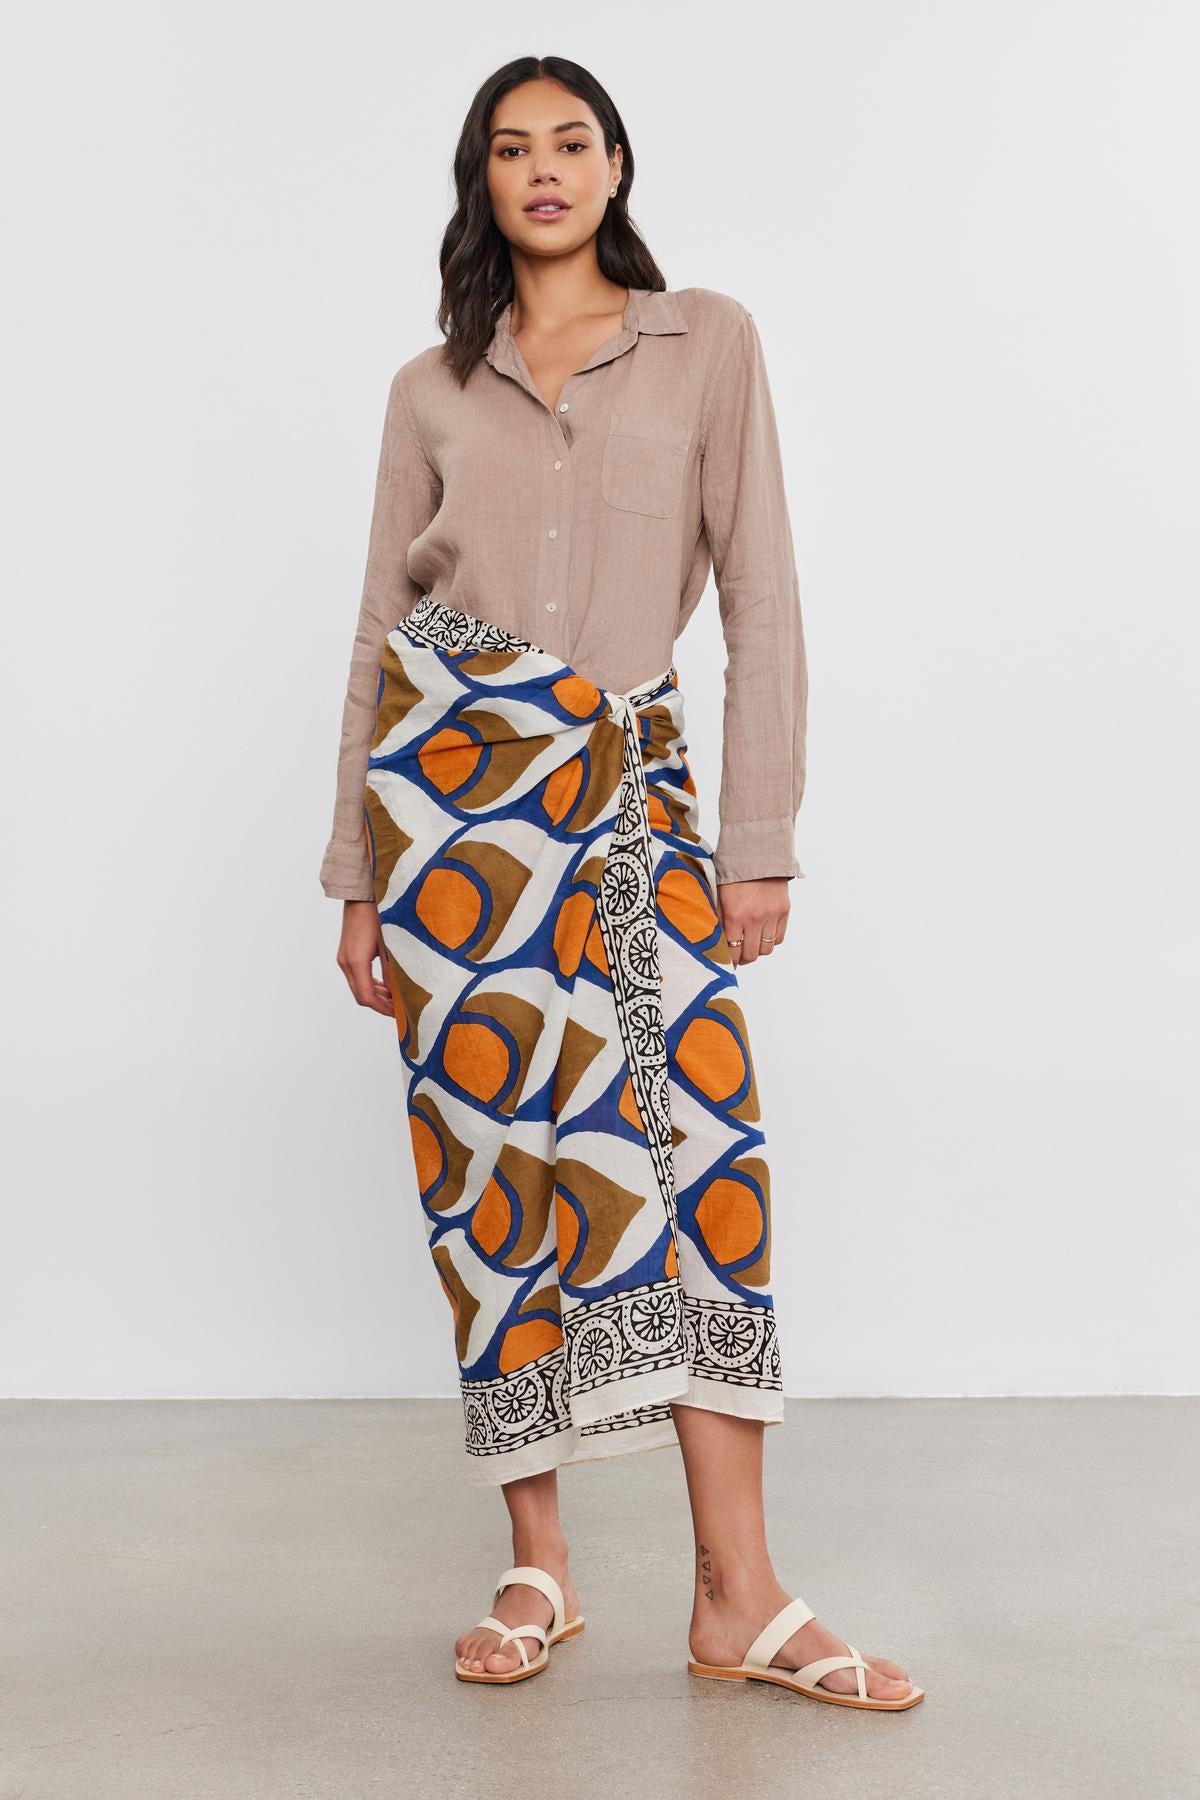   A woman in a studio poses wearing a Velvet by Graham & Spencer NATALIA LINEN BUTTON-UP SHIRT, a colorful patterned skirt, and white sandals. 